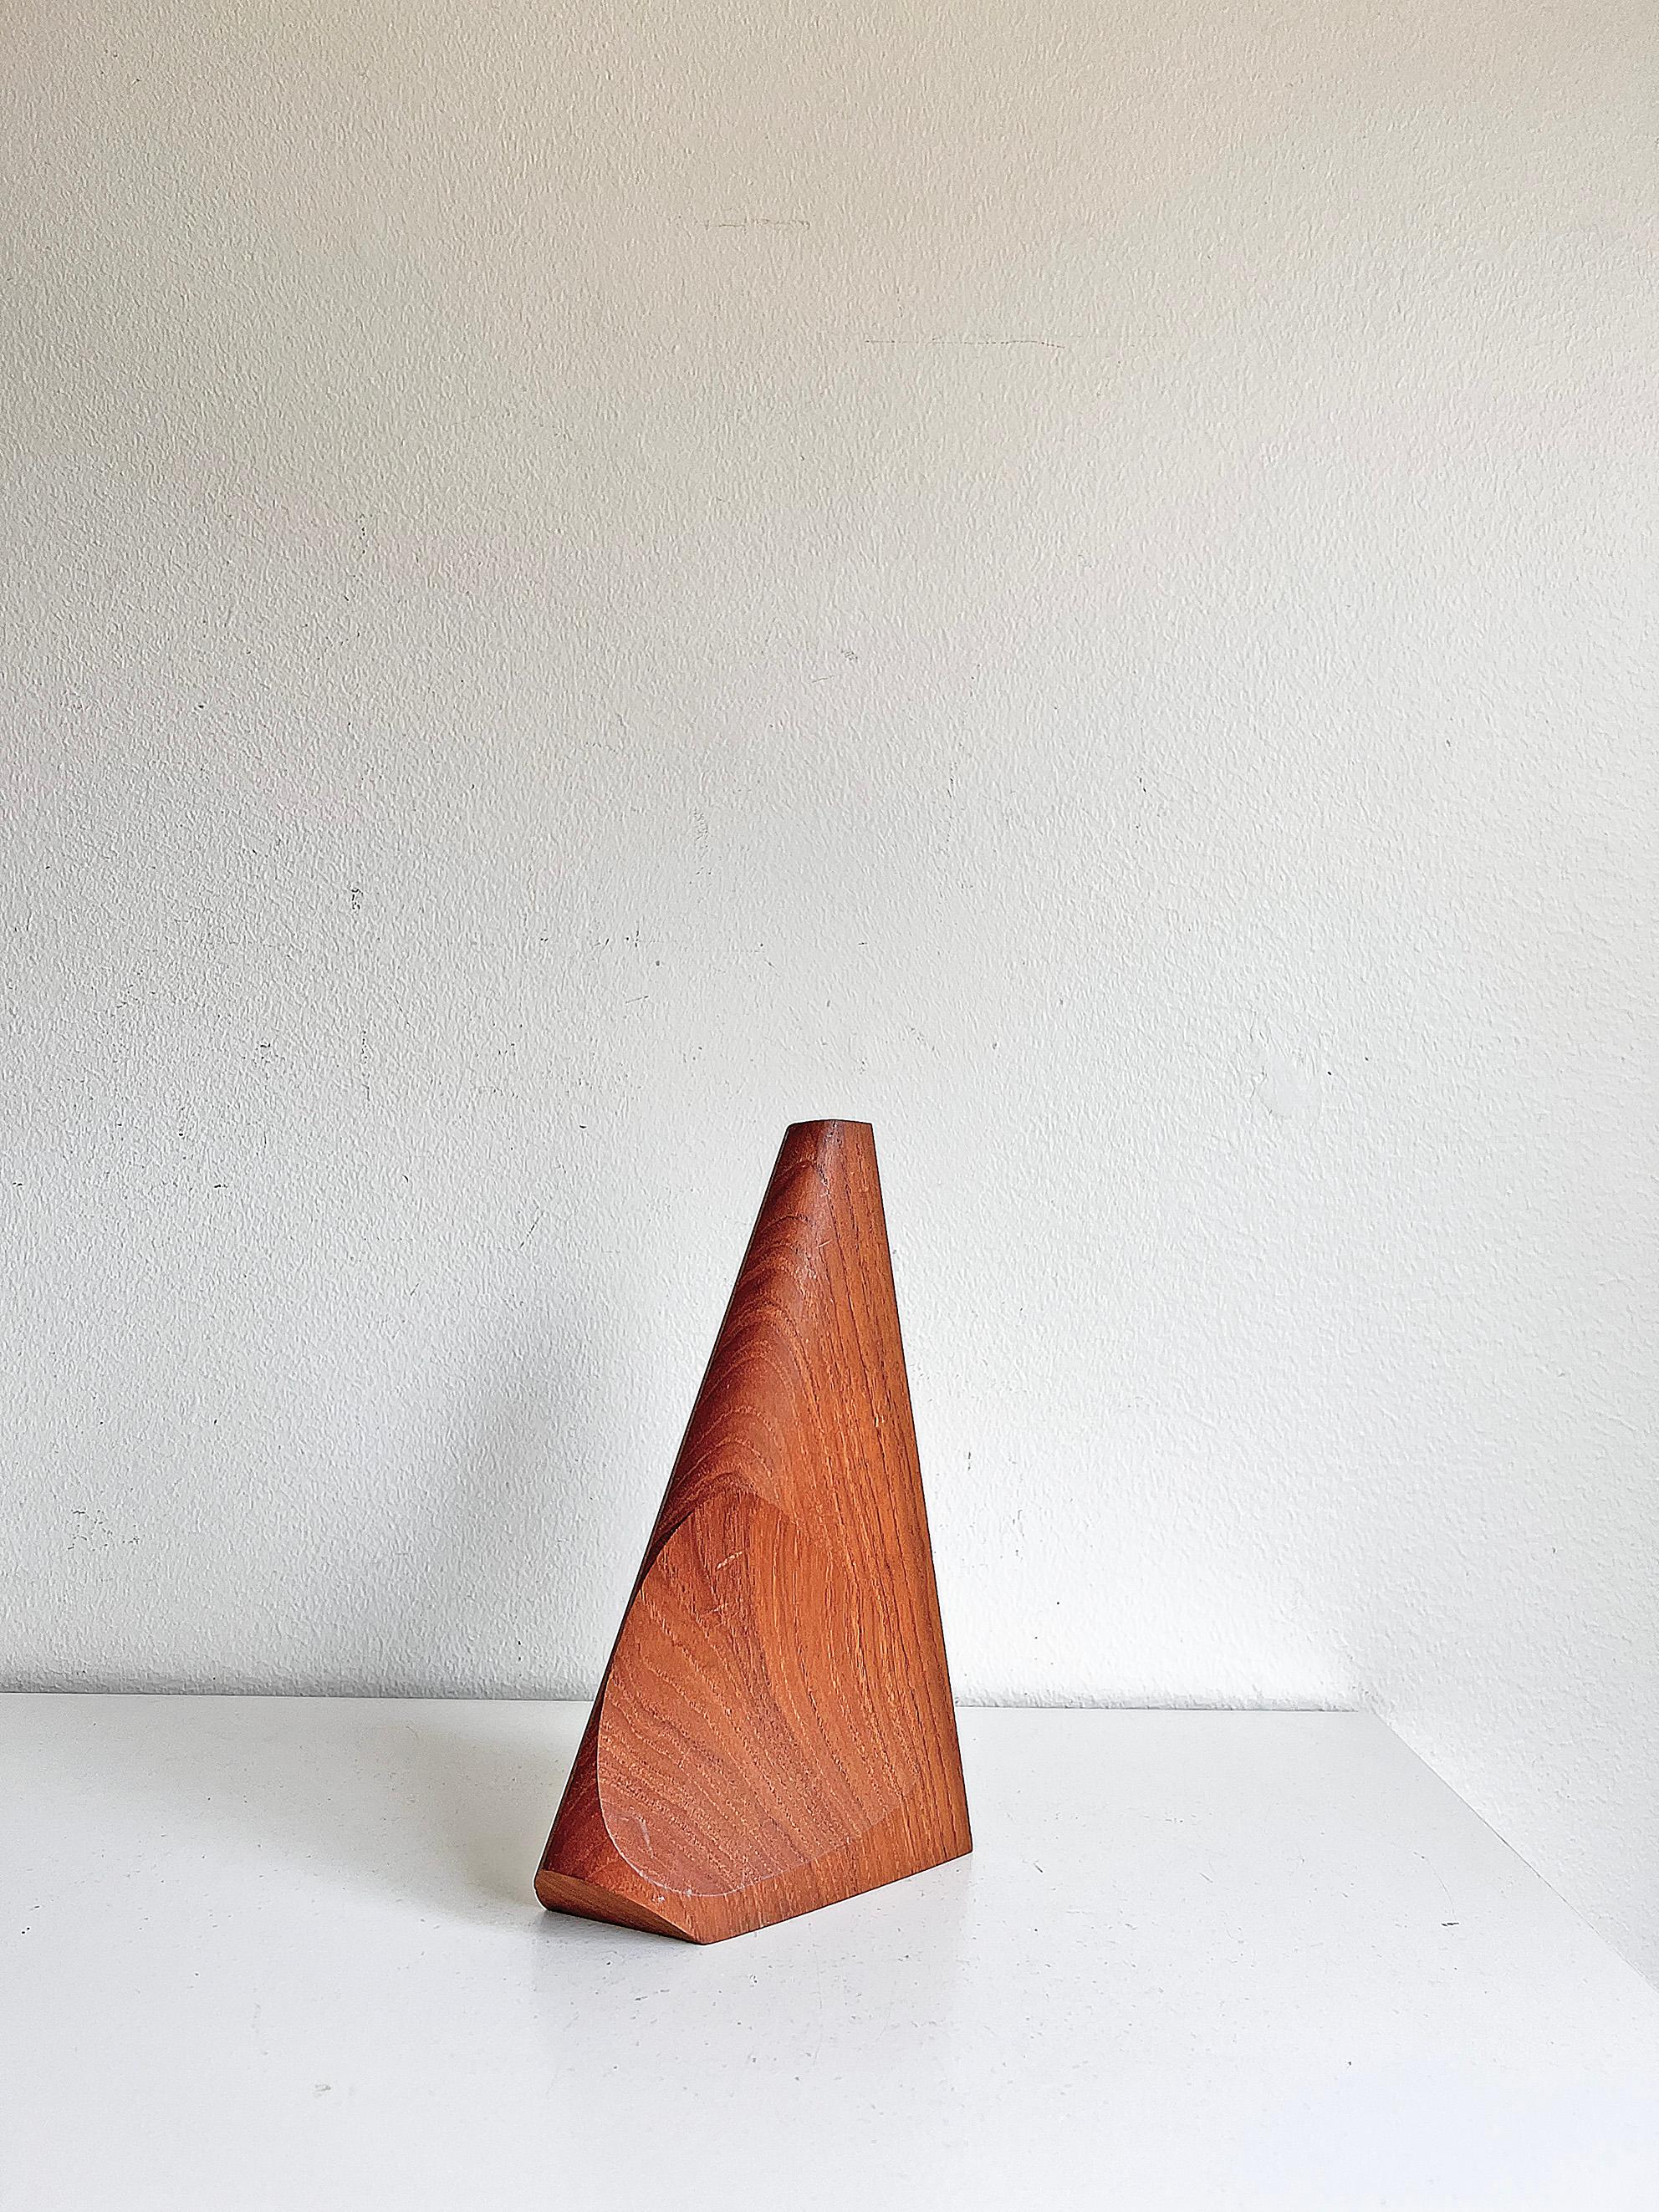 Swedish modern sculptural vase in teak with glas tube inside. Most probably produces in Sweden during 1950 - 1960s. Unknown maker and designer. 
Good vintage condition, wear consistent with age and use.